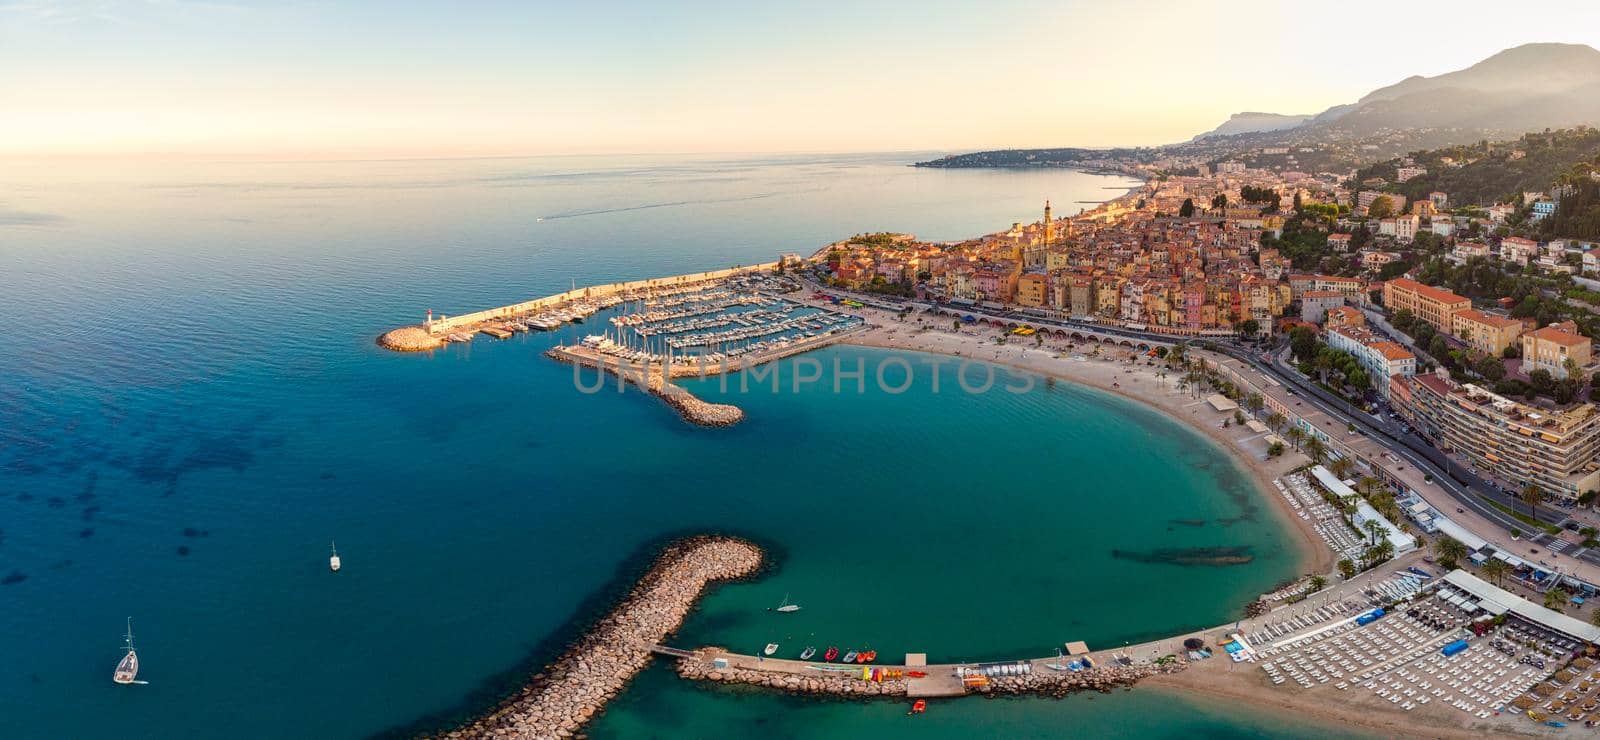  Sand beach beneath the colorful old town Menton on french Riviera, France. Drone aerial view over Menton France Europe